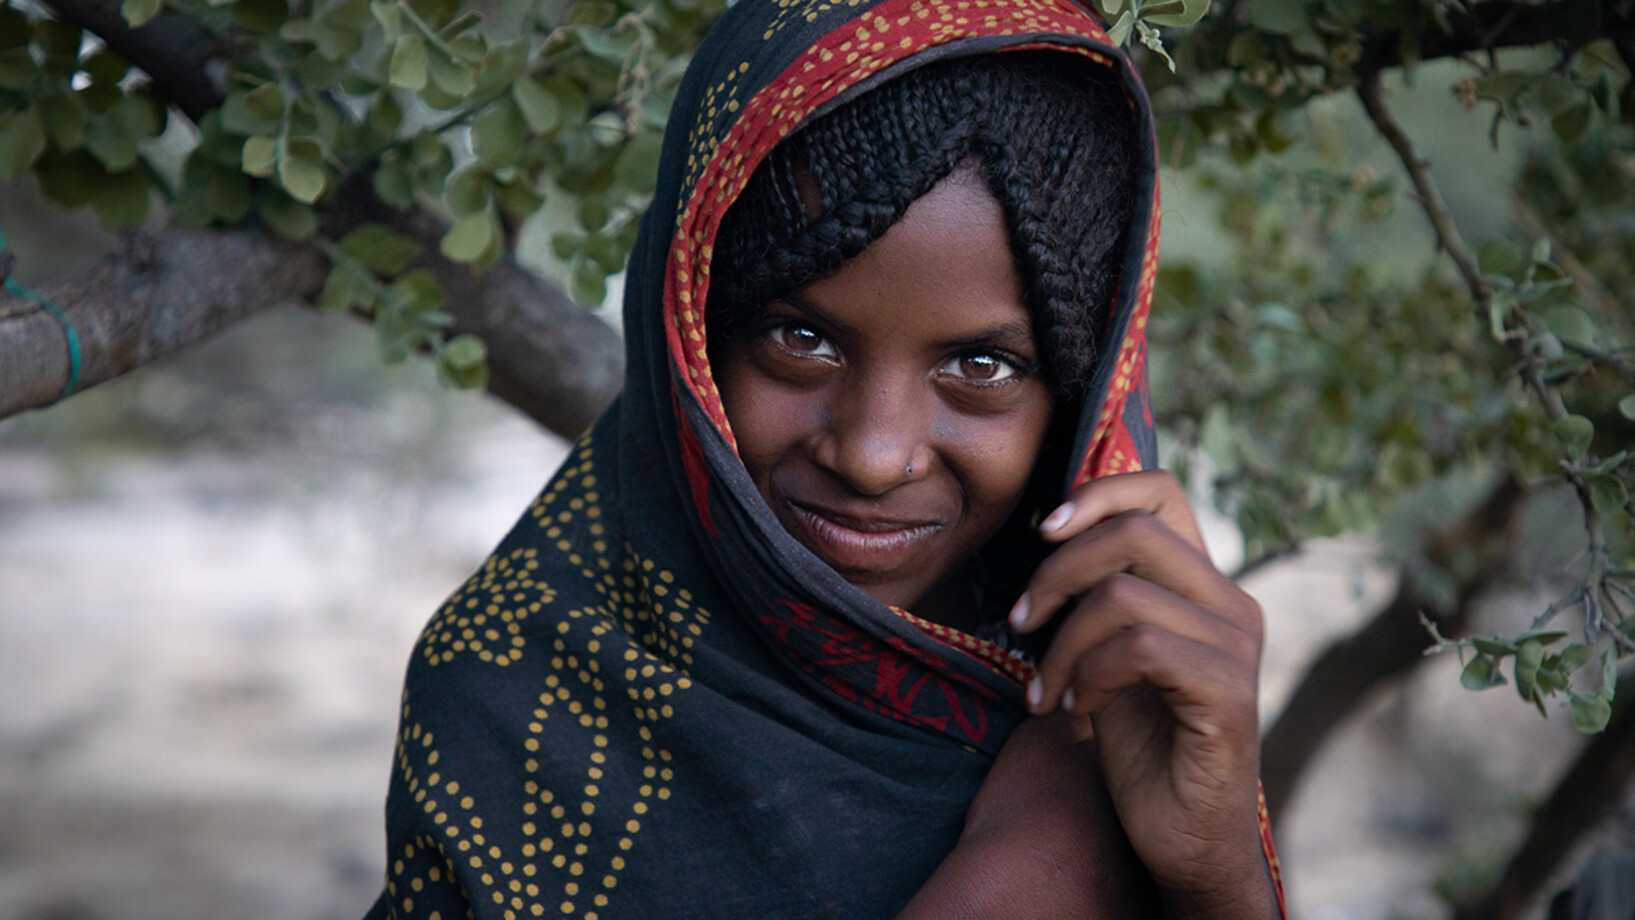 In north-eastern Ethiopia, water scarcity and the loss of livelihoods threaten the future of girls, who are increasingly being forced into child marriage.